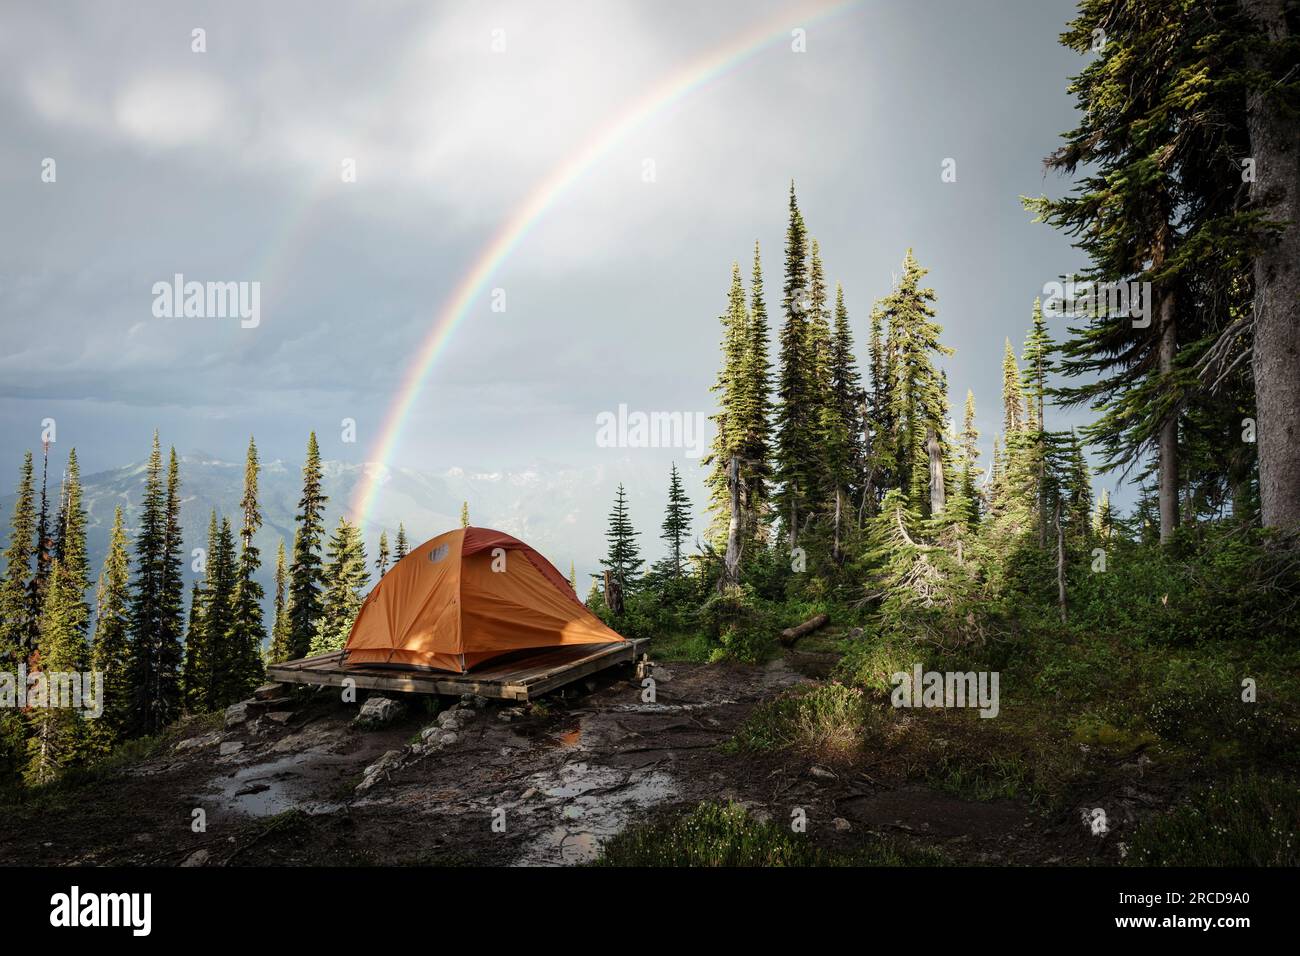 Camping tent in mountain forest with rainbow, British Columbia, Canada Stock Photo